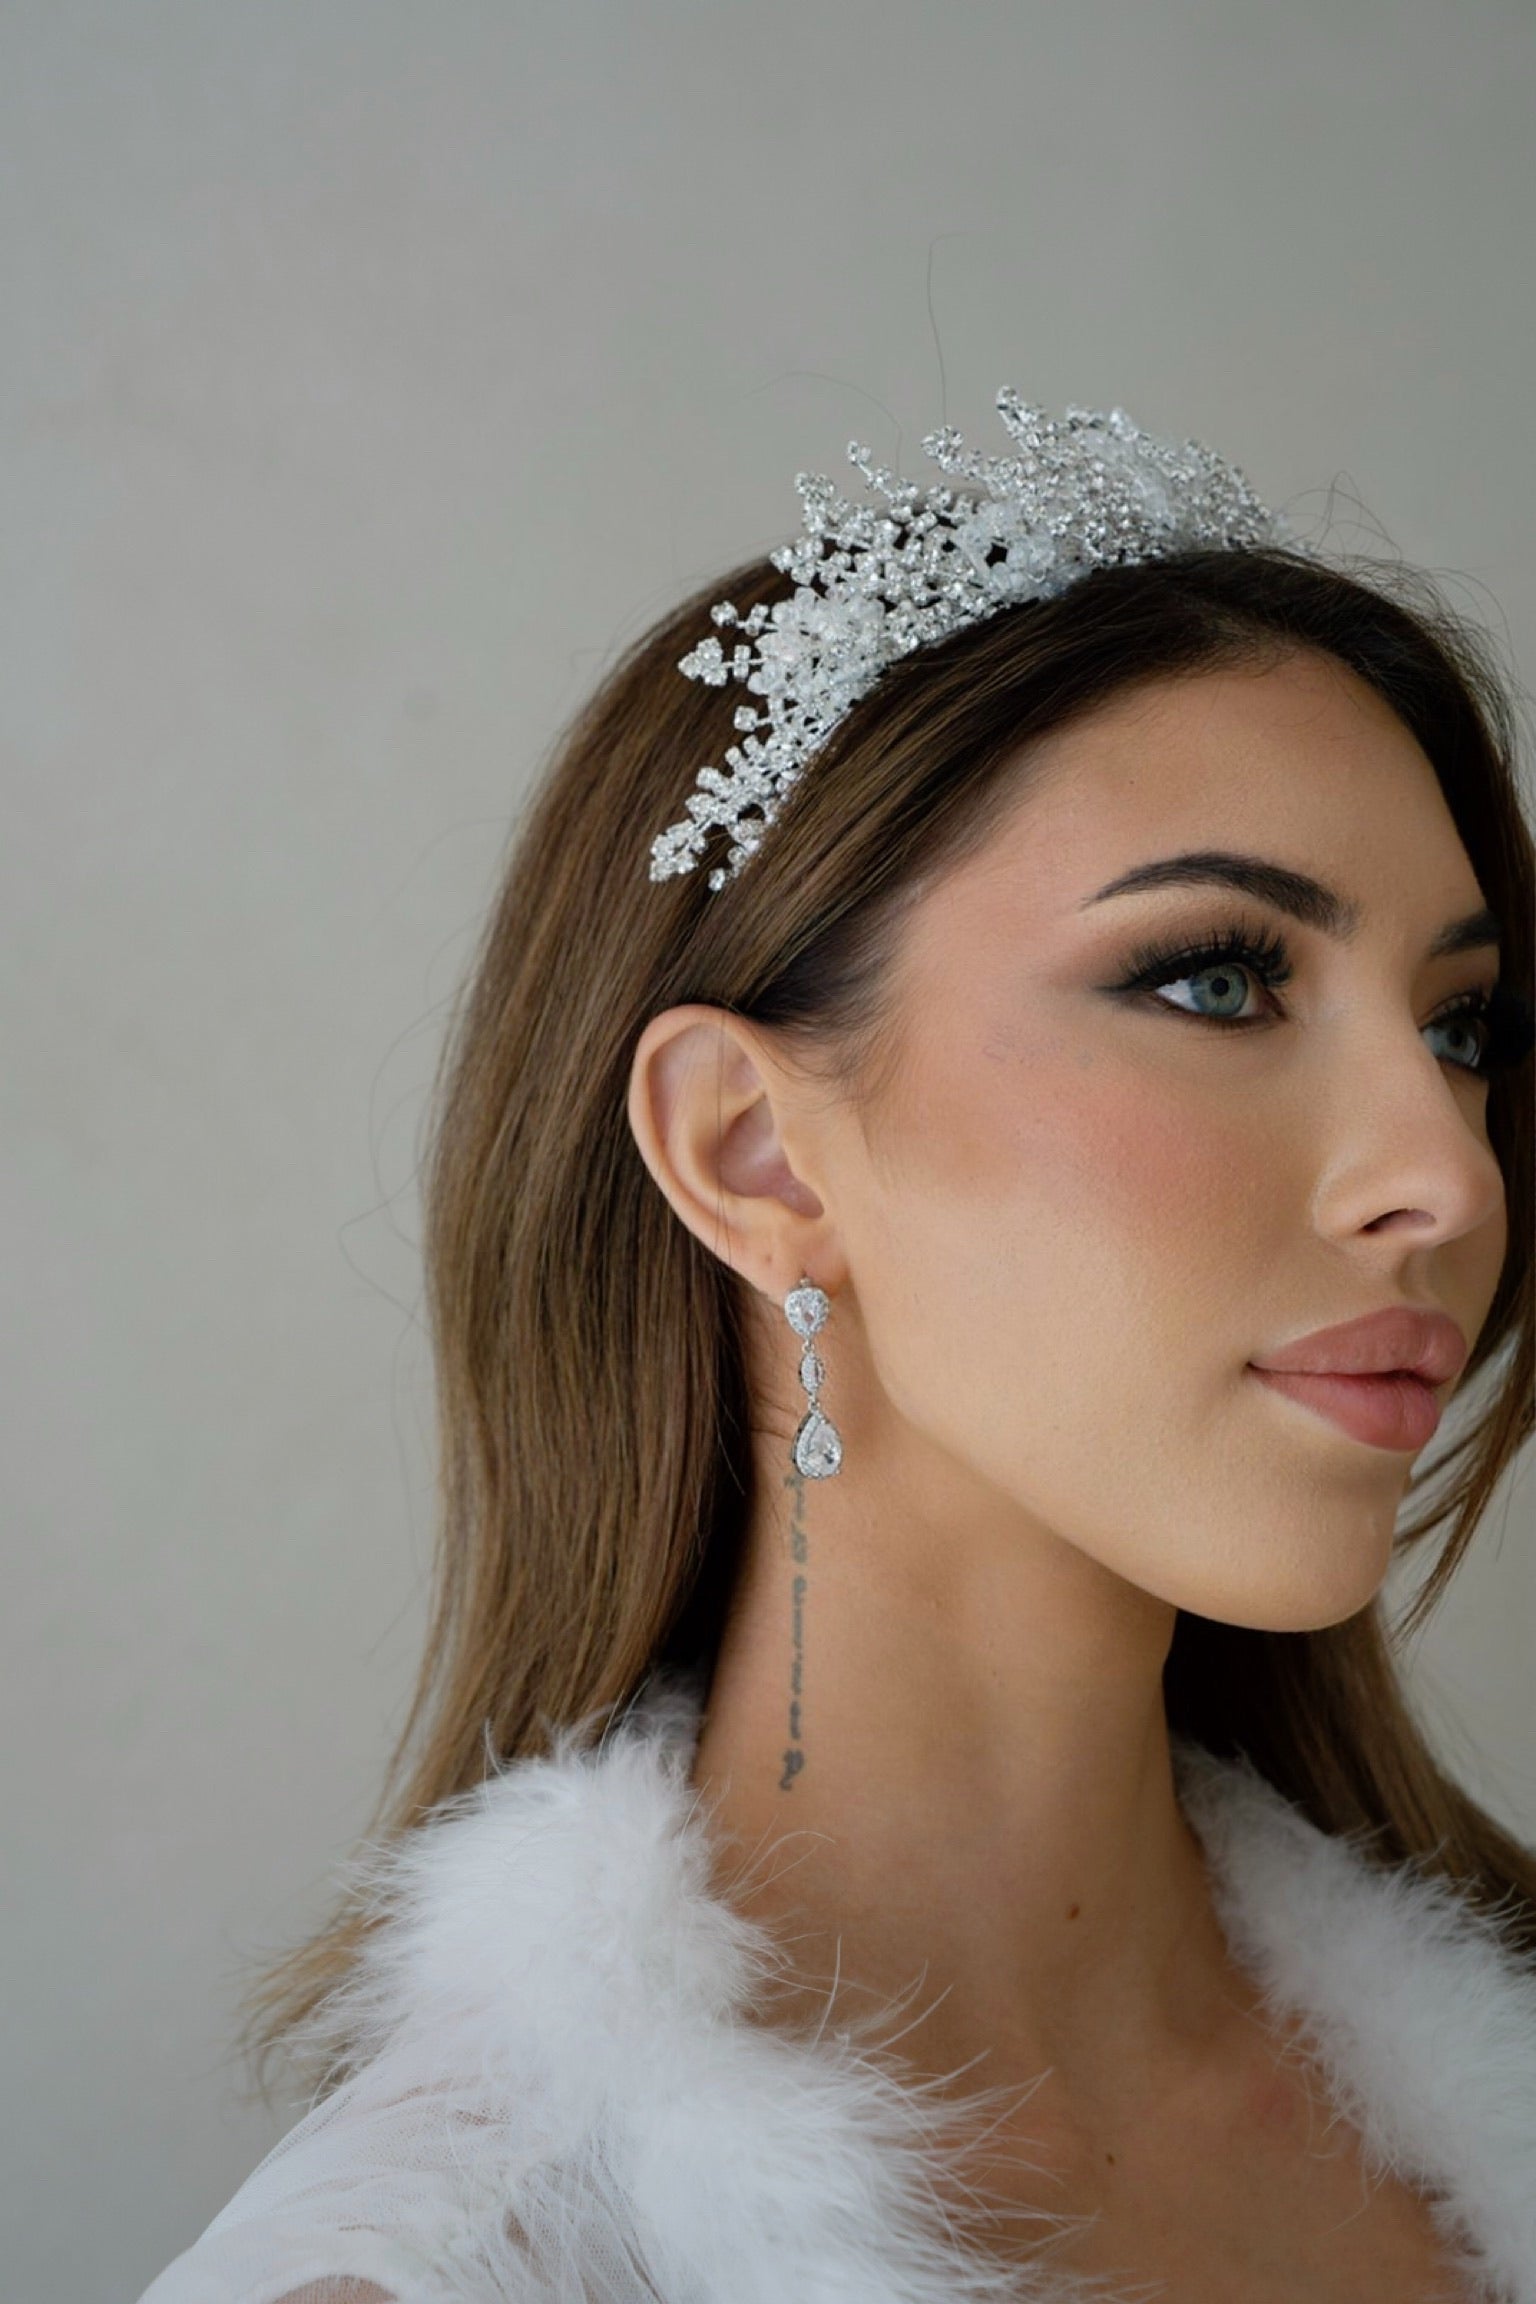 A stylish woman in a white dress and tiara, accessorized with elegant Iris silver earrings